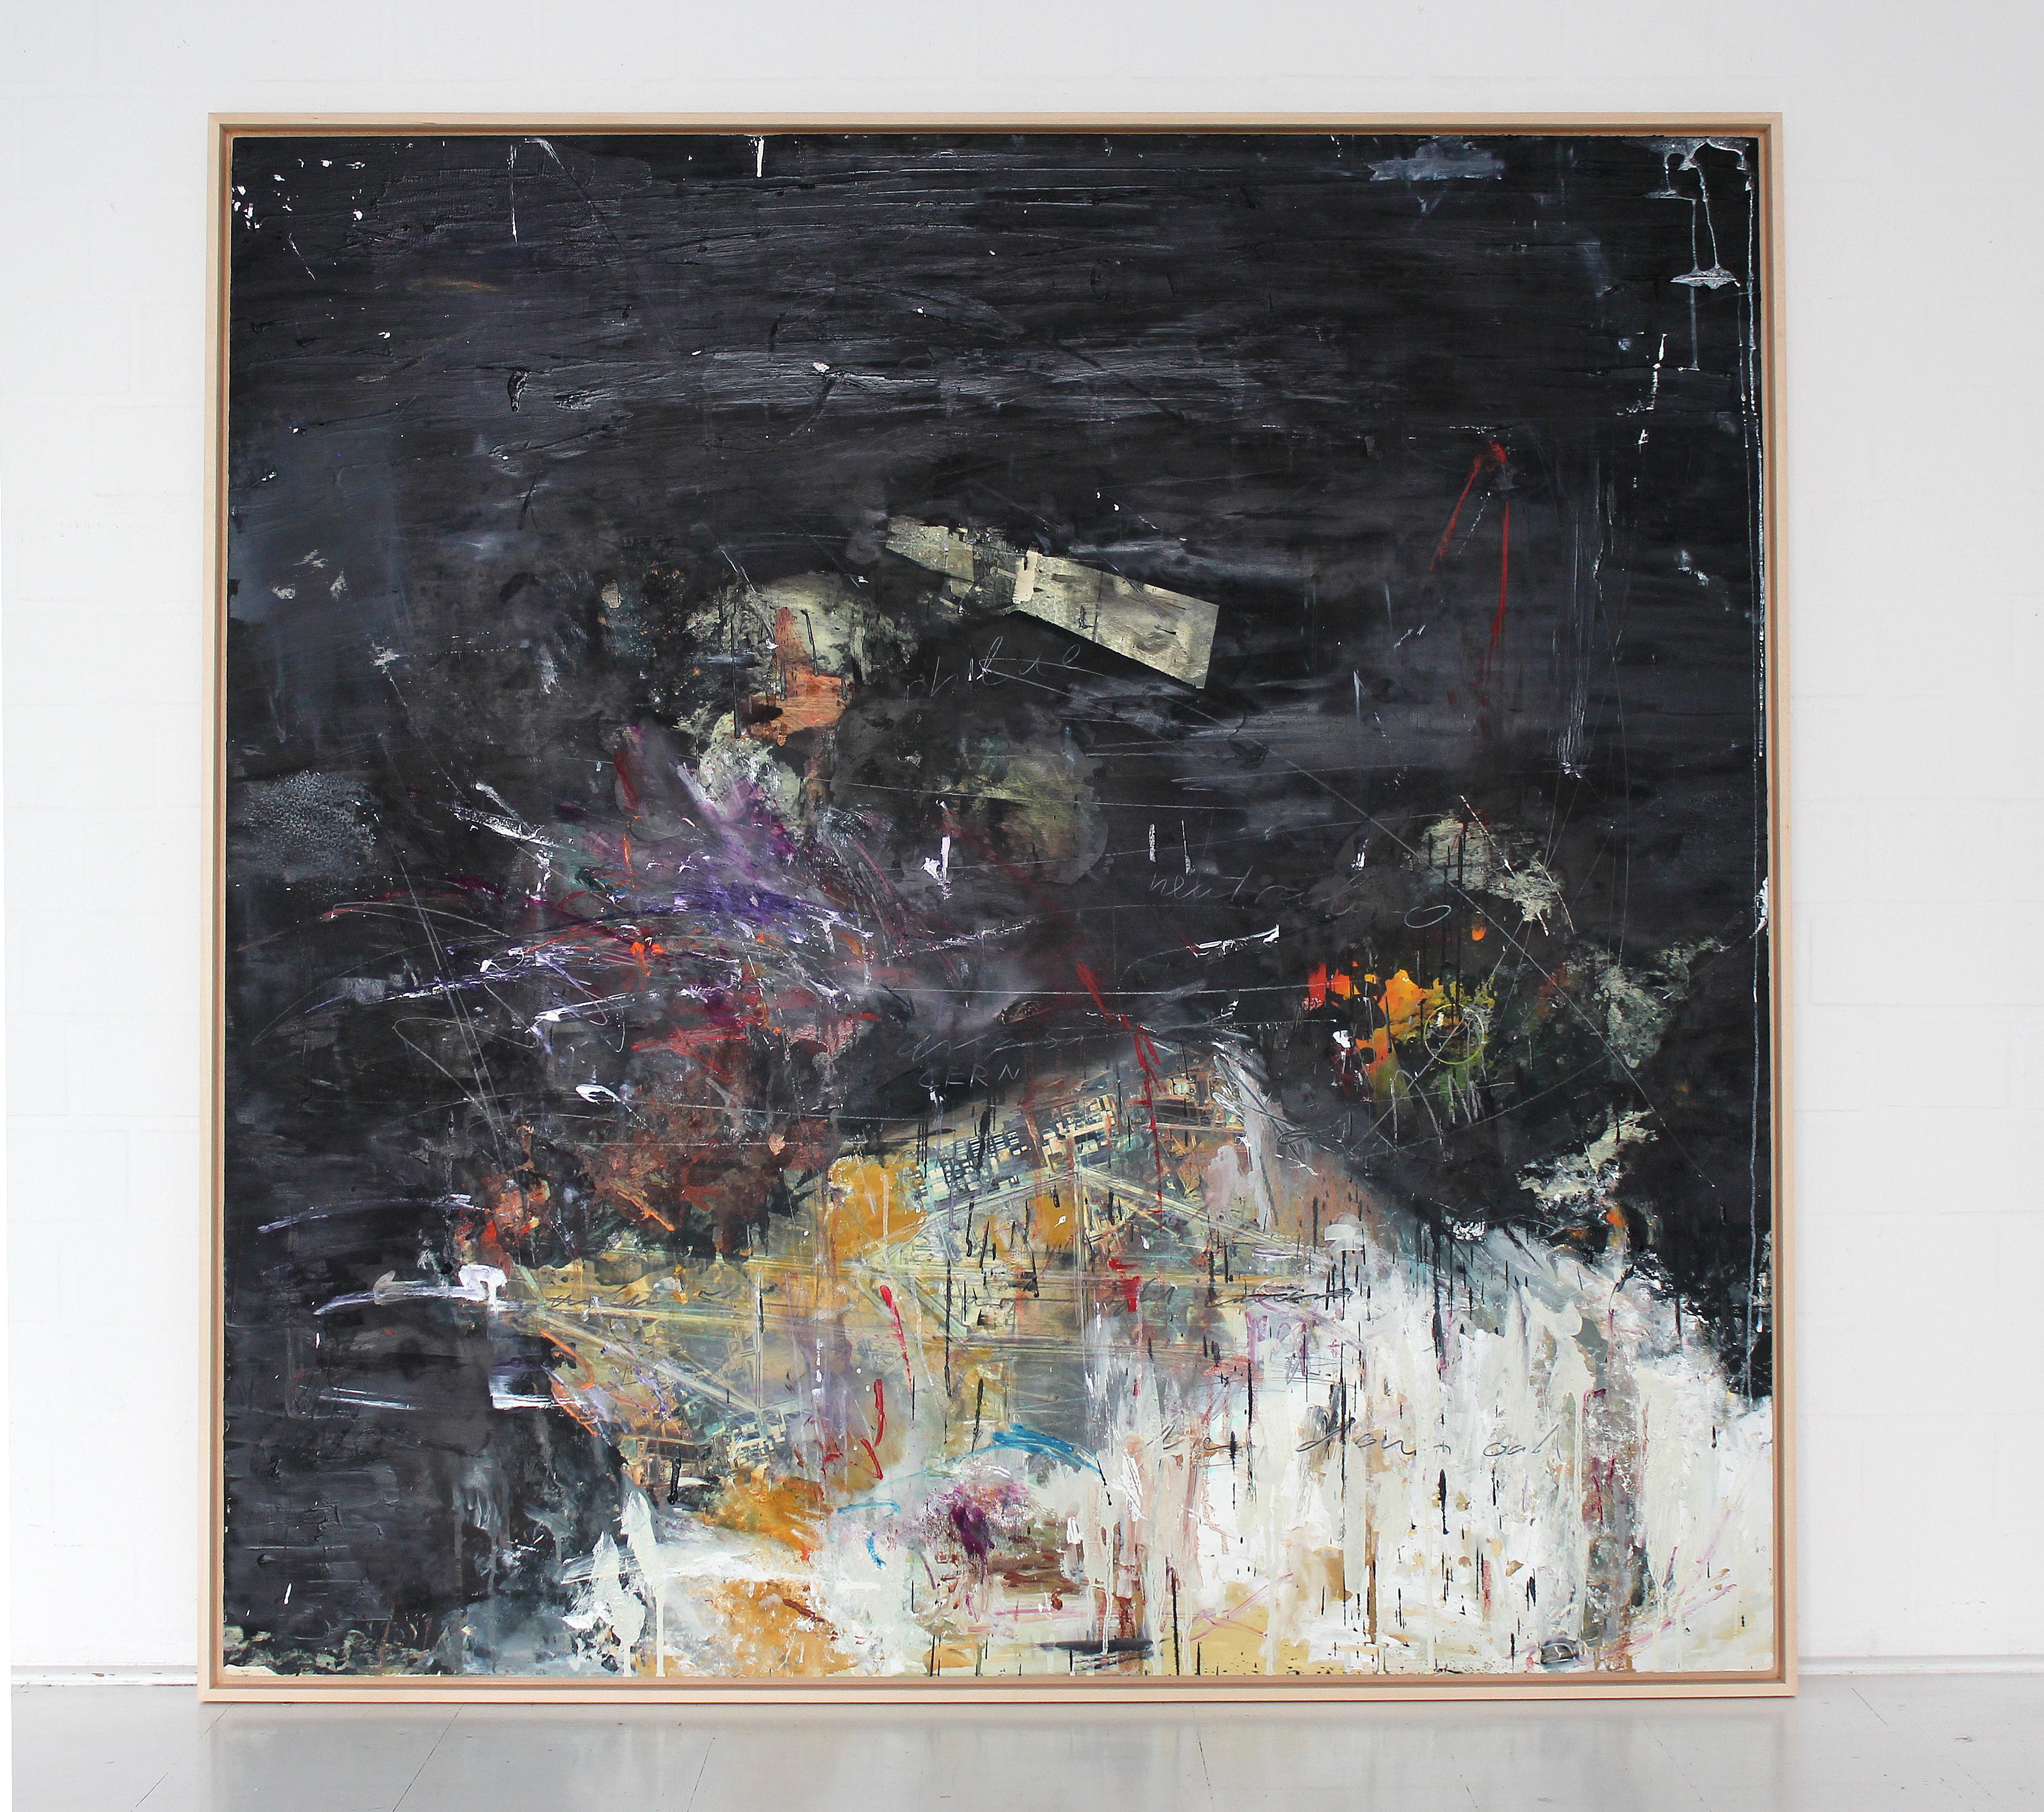 'Area 51' abstract mixed-media on wood by Stefan Heyer
Mixed-media: oil, photo-transfer, oil stick, crayon, pencil on wood

'Area 51' has an incredible power of abstract expressionism. It is spontaneous, strong and bold. Shades of black color are a